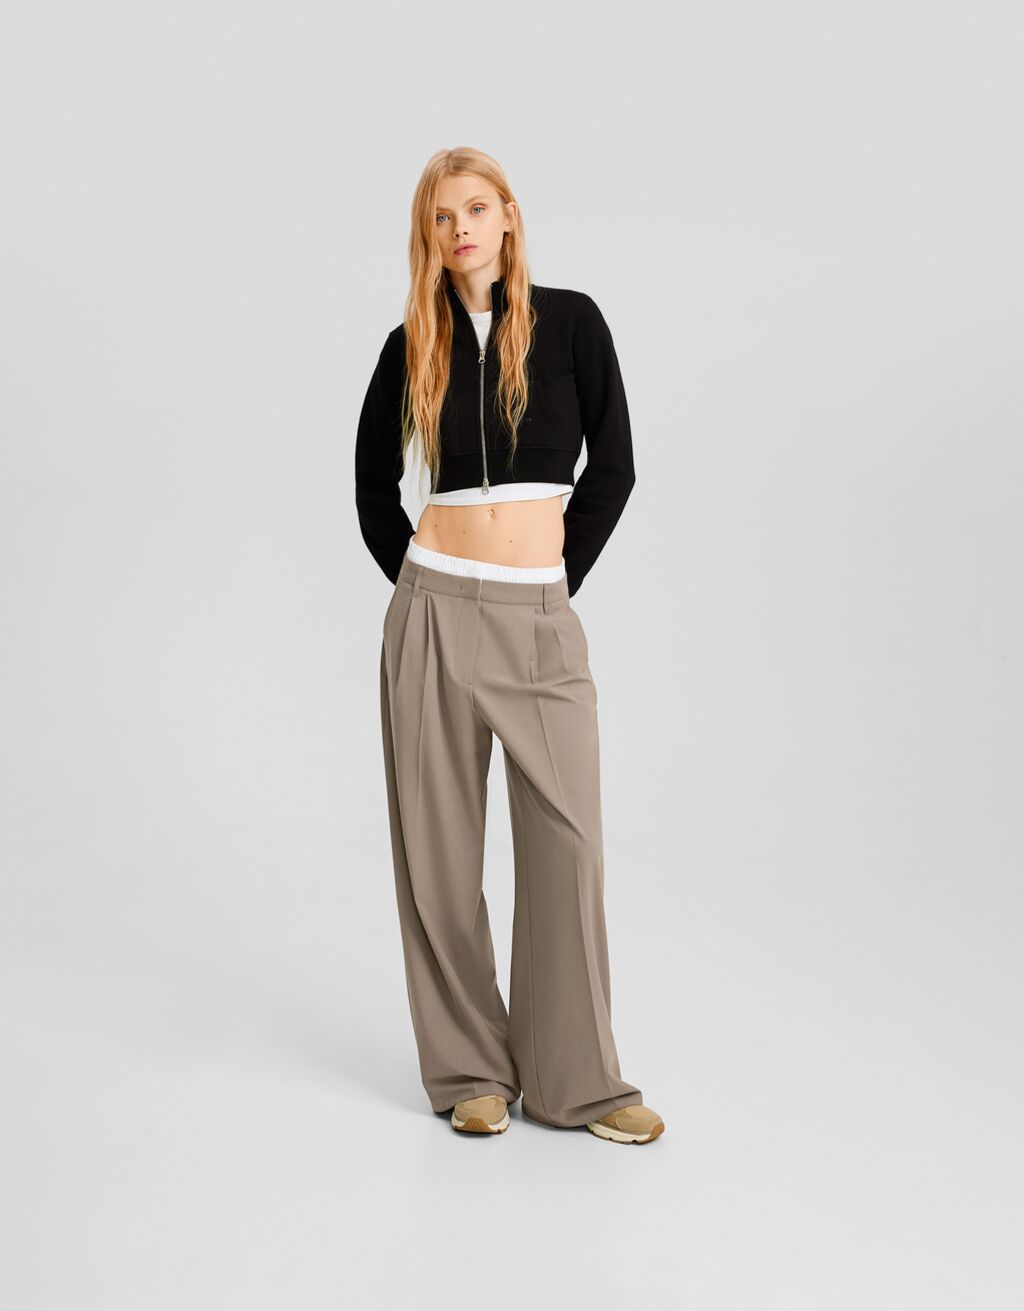 Anko Brown Linen Stretchy Pants/Trousers | Stretchy pants, Clothes design,  Outfit inspo